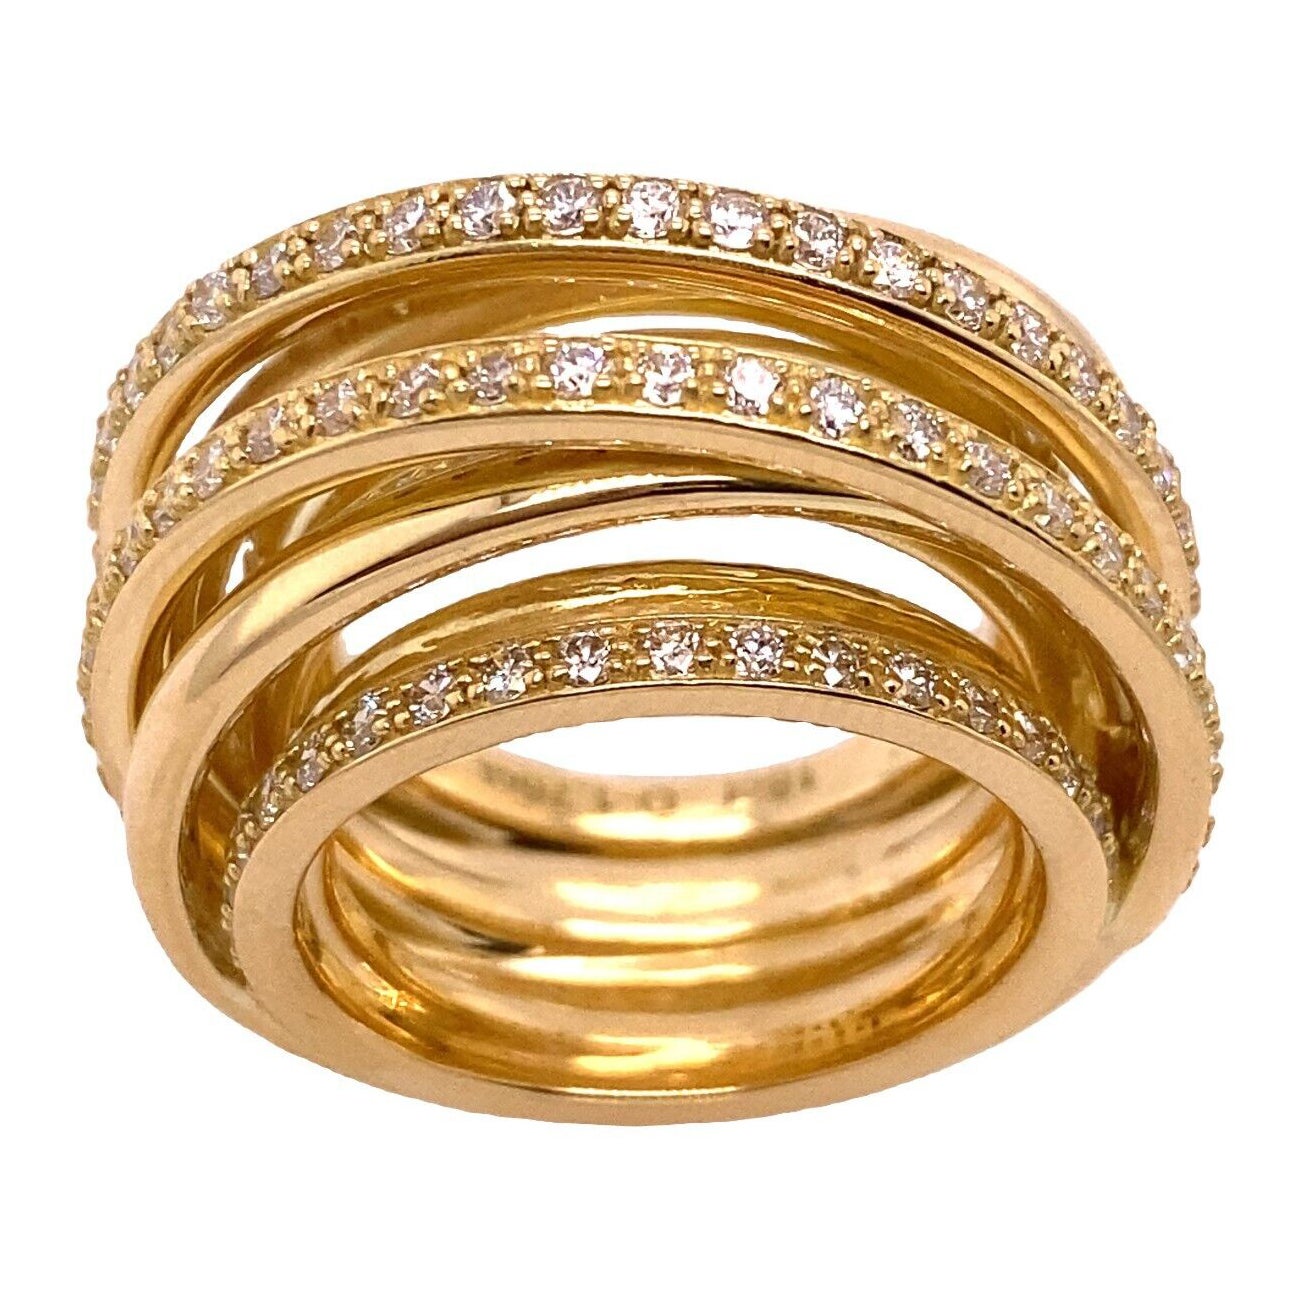 New Fine Quality Multi Strand 18ct Yellow Gold Dress Ring with 1.76ct Diamonds